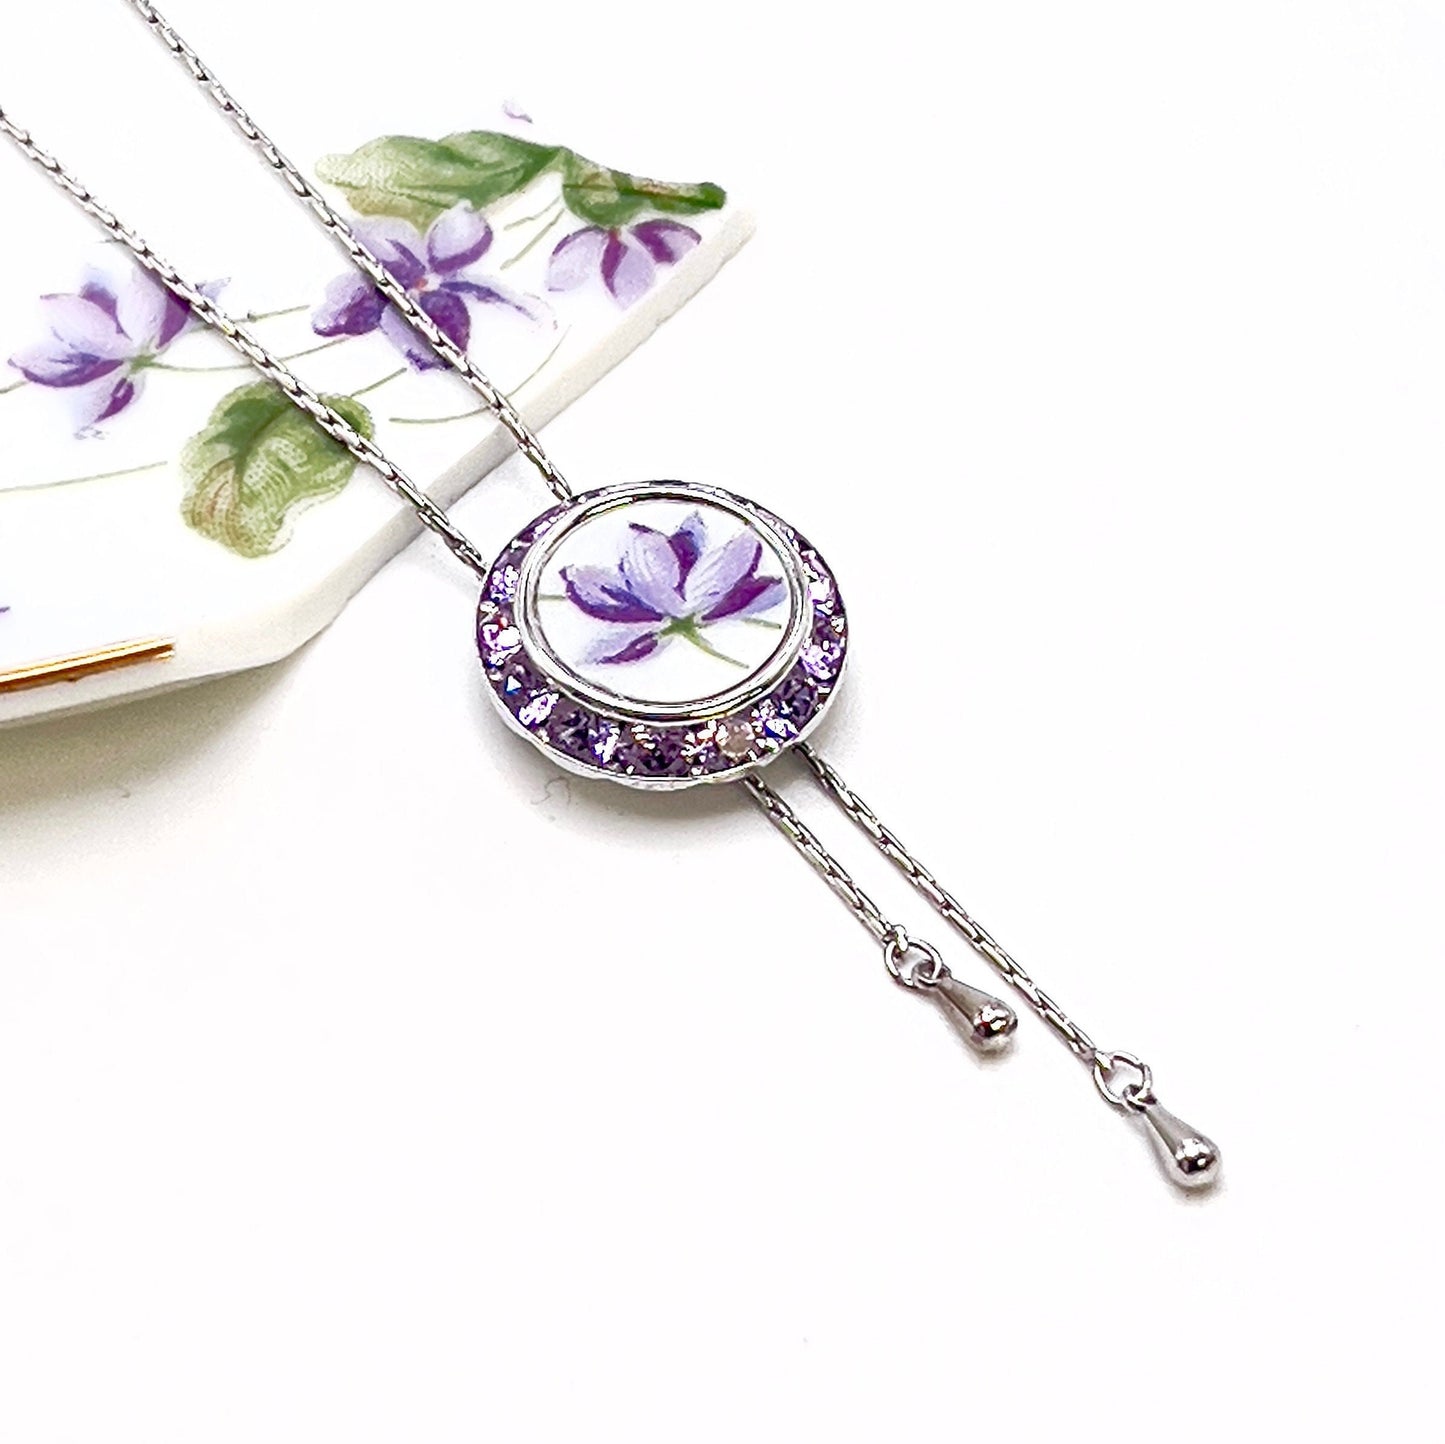 Adjustable Violet Lariat Necklace, Broken China Jewelry, Crystal Bolo Tie, Purple Flower Slide Necklace, Unique Gifts for Women